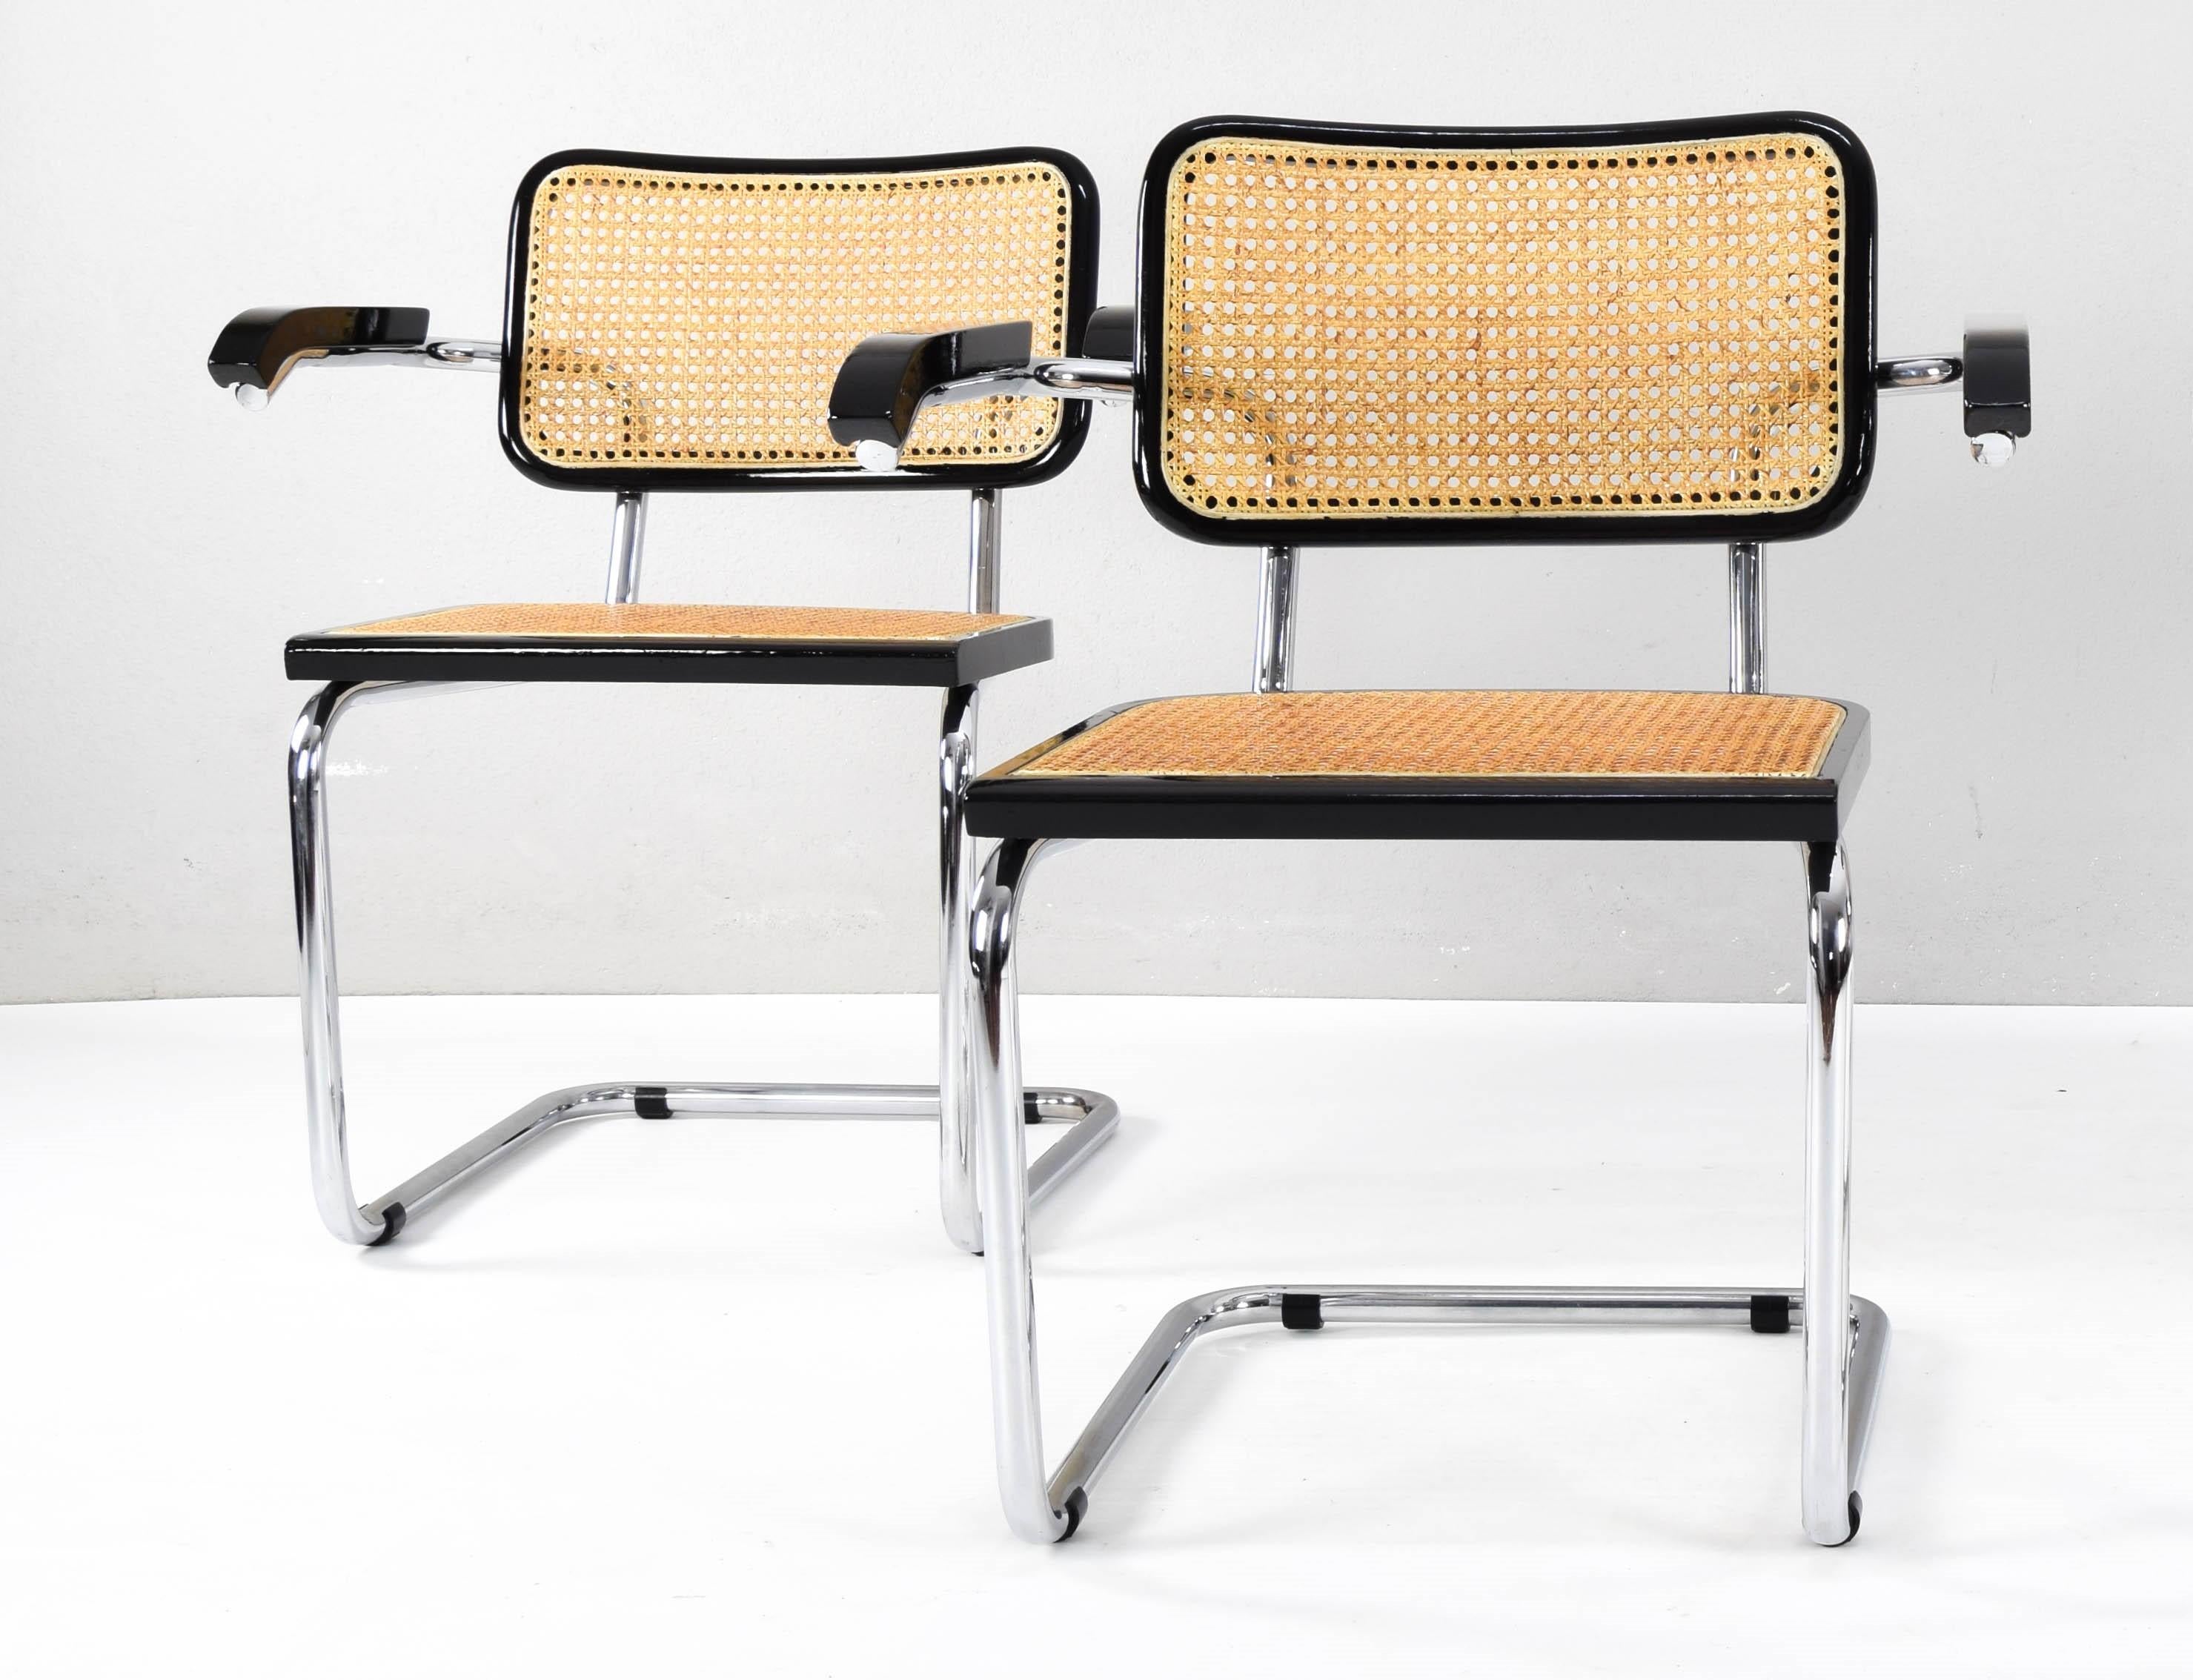 Beautiful and iconic set of two Cesca chairs, model B64, edition with armrests, made in Italy in the 70s.
Chromed tubular structure with worn areas but in good condition.
The backrest and seat structure is made of black lacquered beech wood and